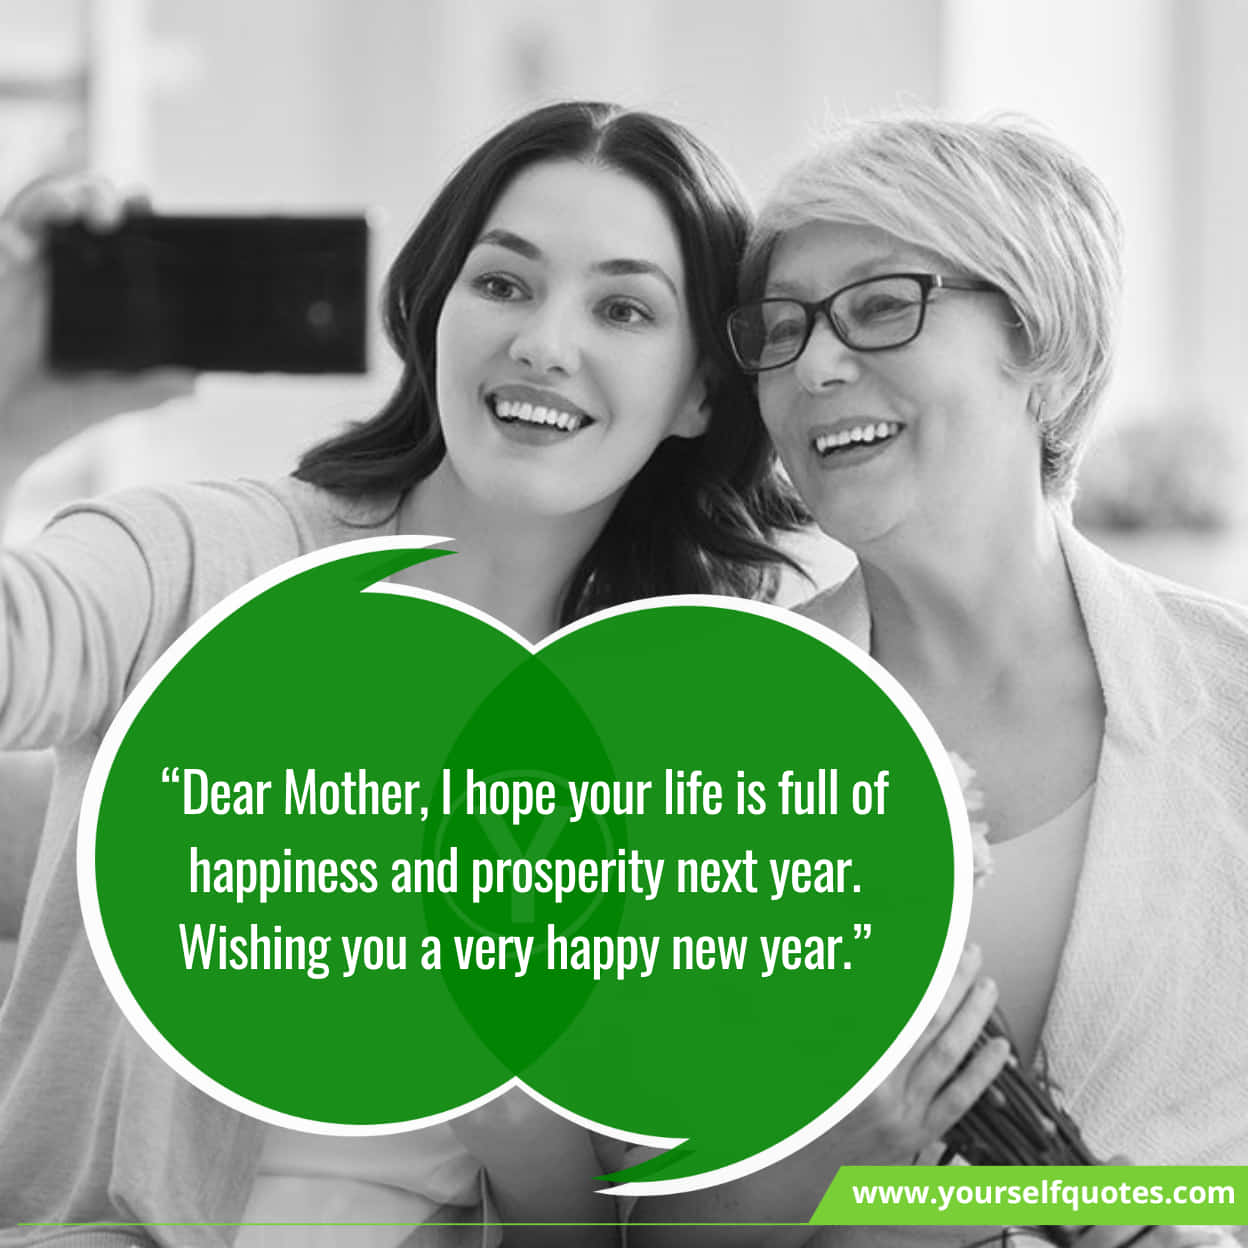 Best Nice Wishes For Mother On New Year